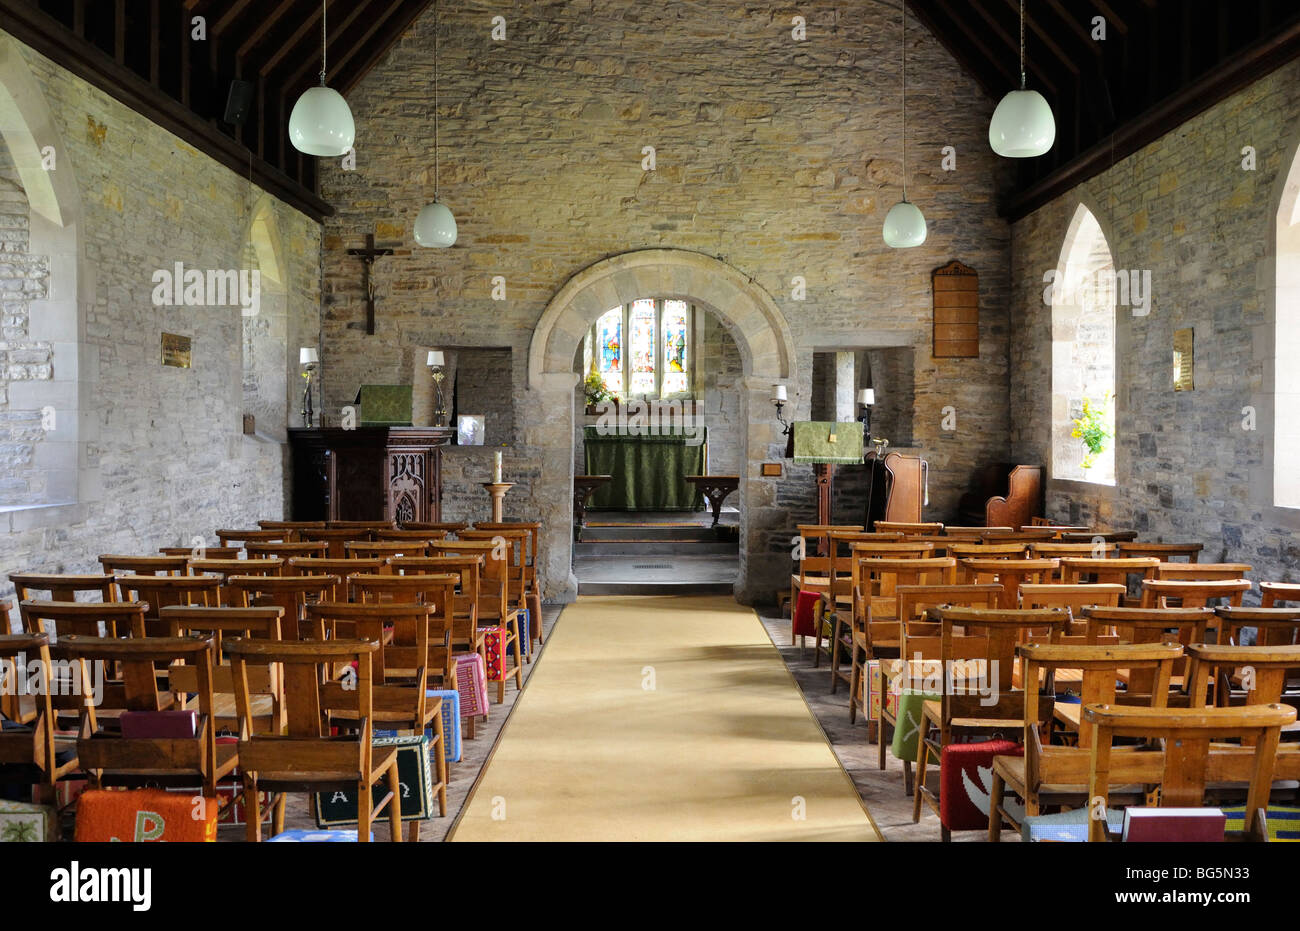 The interior of St Anne's Church, Wyre Piddle, Worcestershire, England, UK. Stock Photo